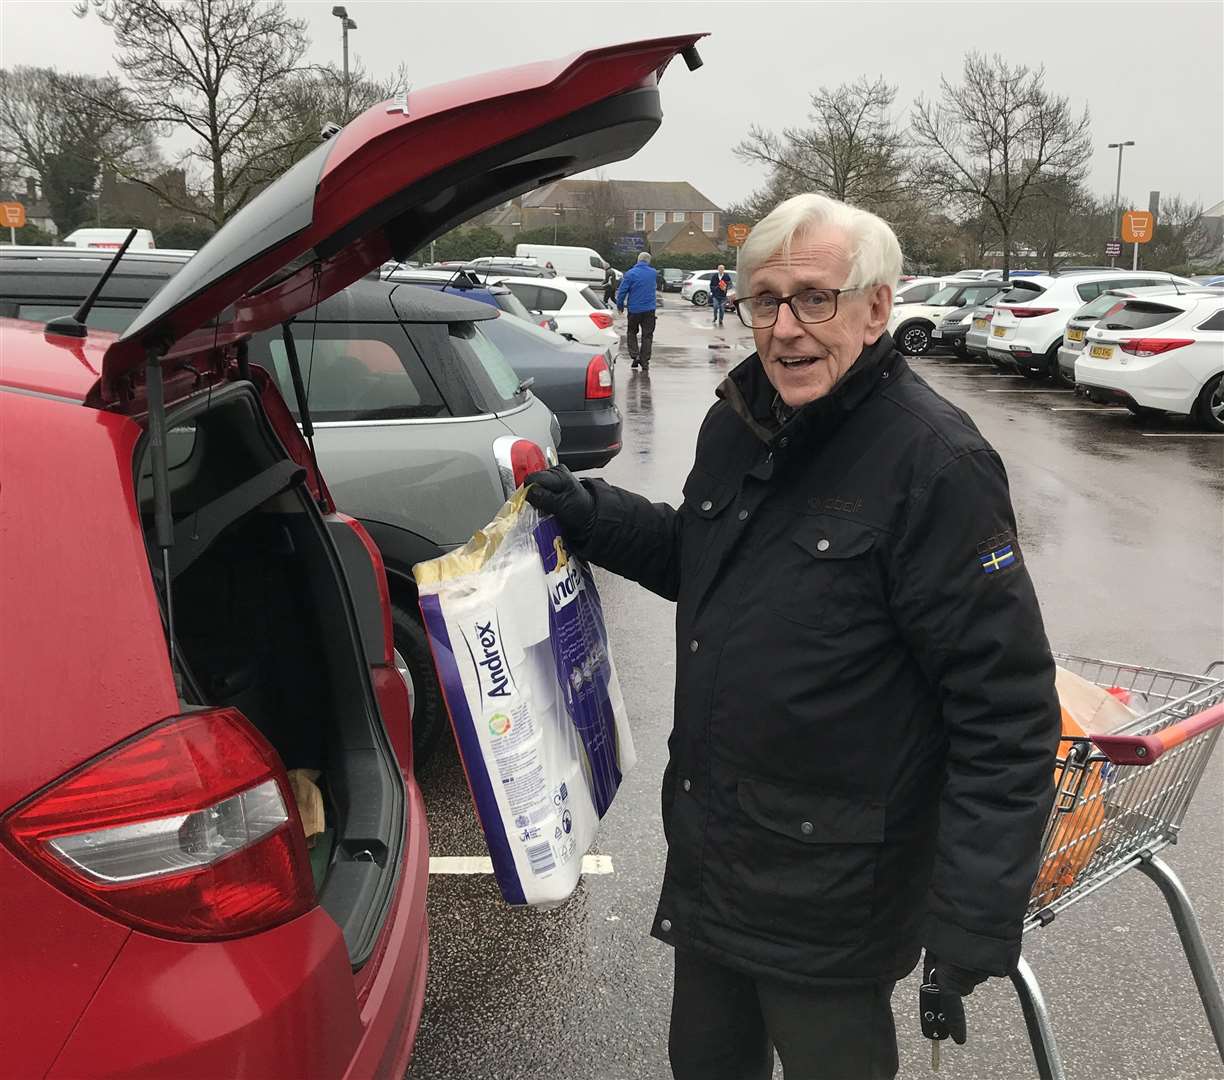 Because of huge demand, some supermarkets started to reserve their first hour of opening for the over 70s and vulnerable people. Among these was Sainsbury's in Sittingbourne, which still reported 200 people queuing outside waiting for it to open at 7am. Customer Mike Grantham, 83, said: "I was about 10th in the queue and I understood that coming at this time they would have stock - but I got the last pack of toilet roll. I can't understand it. Some idiot somewhere in the world decided toilet rolls are a must. It does not give you diarrhoea, this thing."